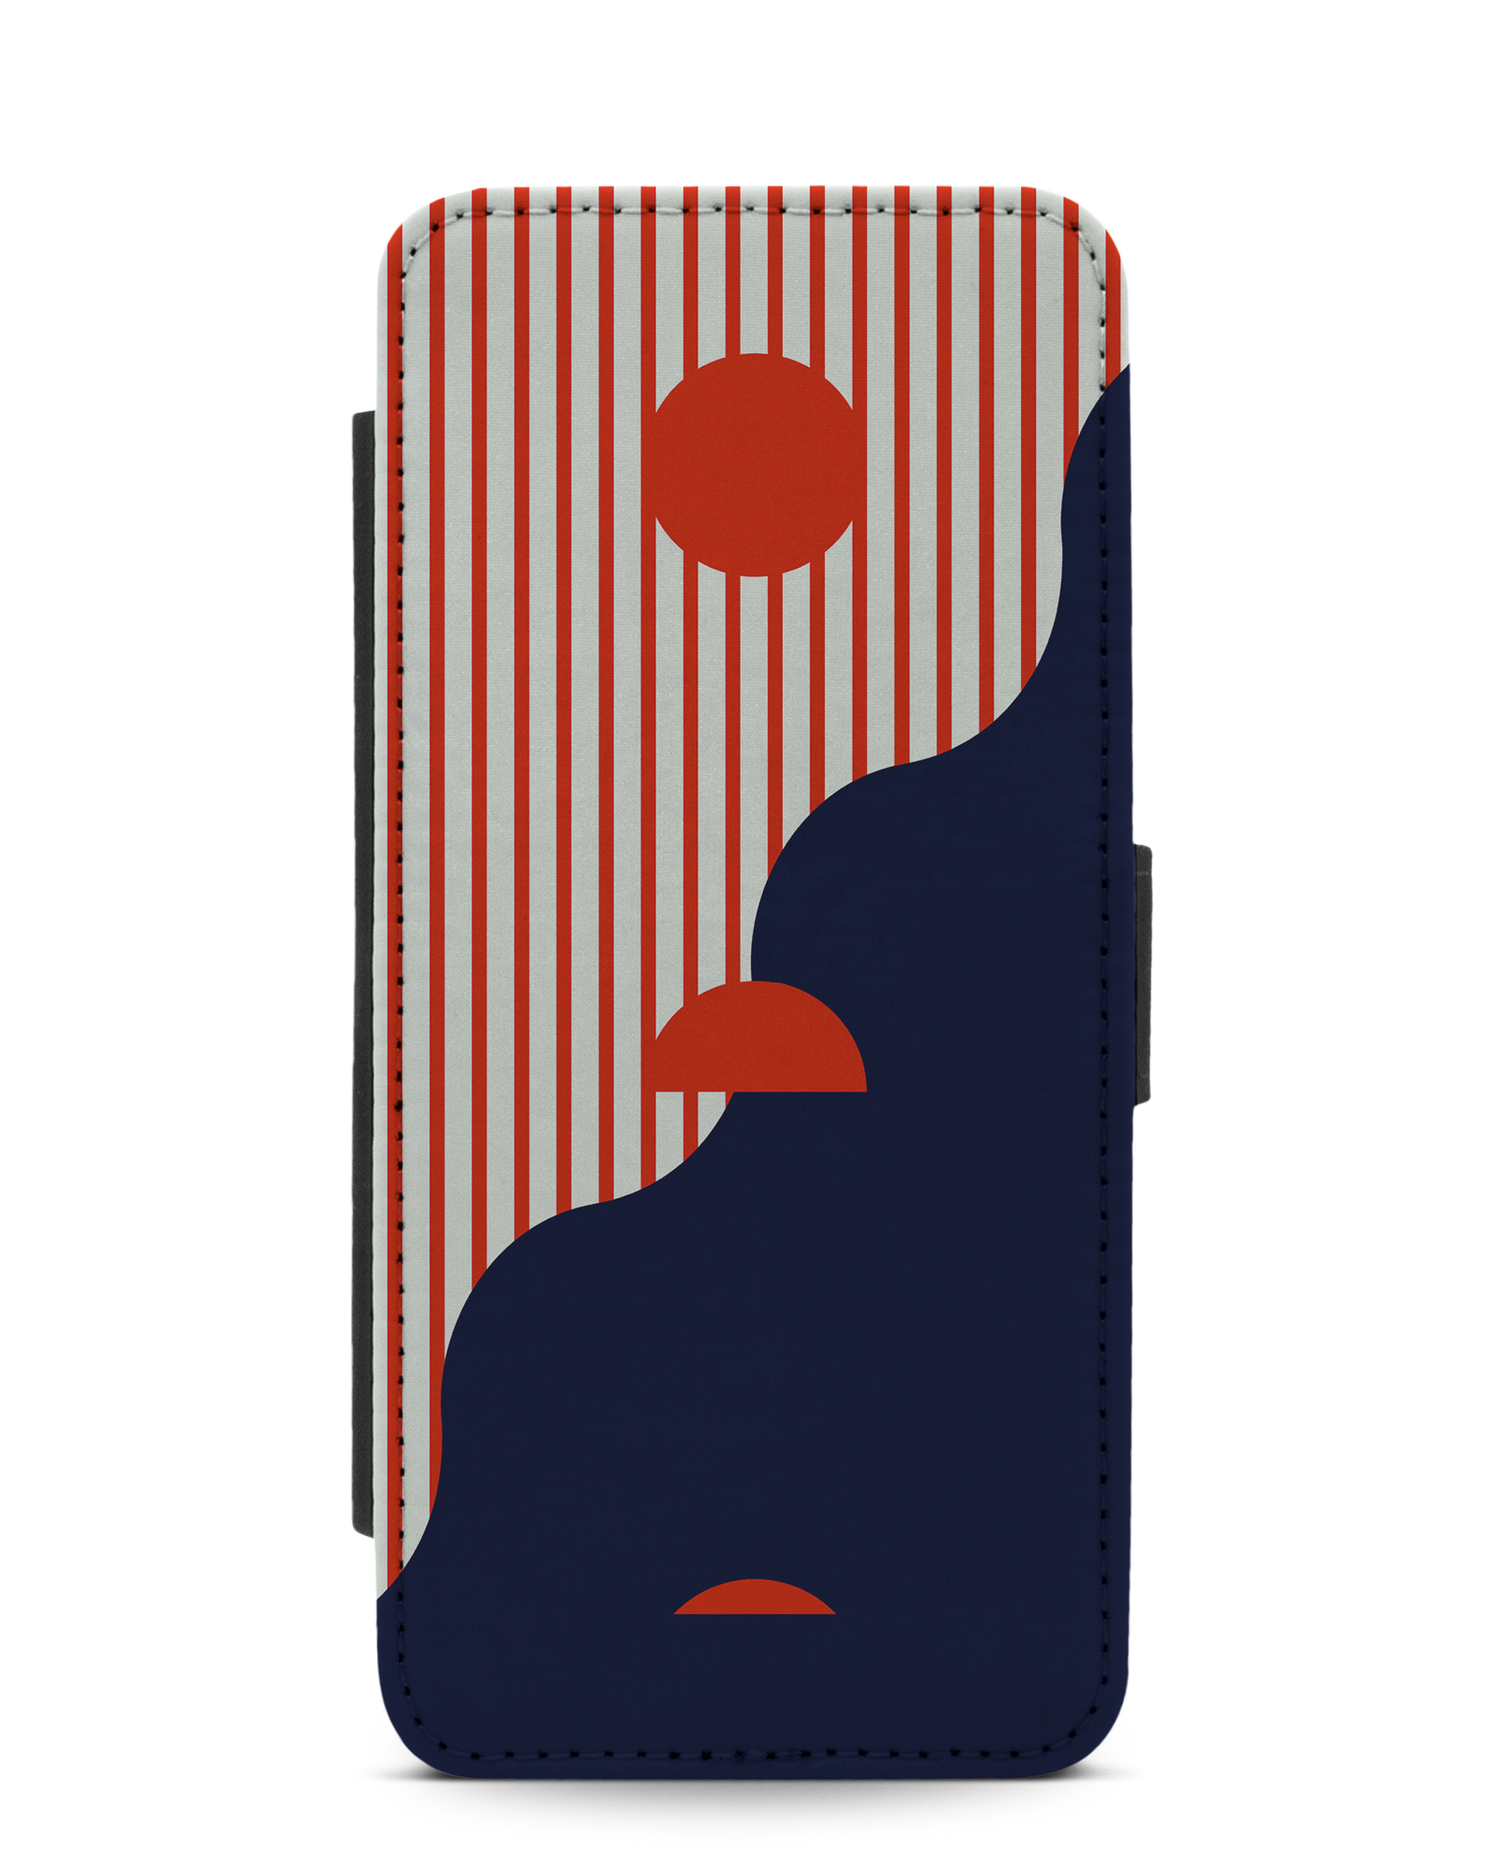 Metric Sunset Wallet Phone Case Samsung Galaxy S20: Front View